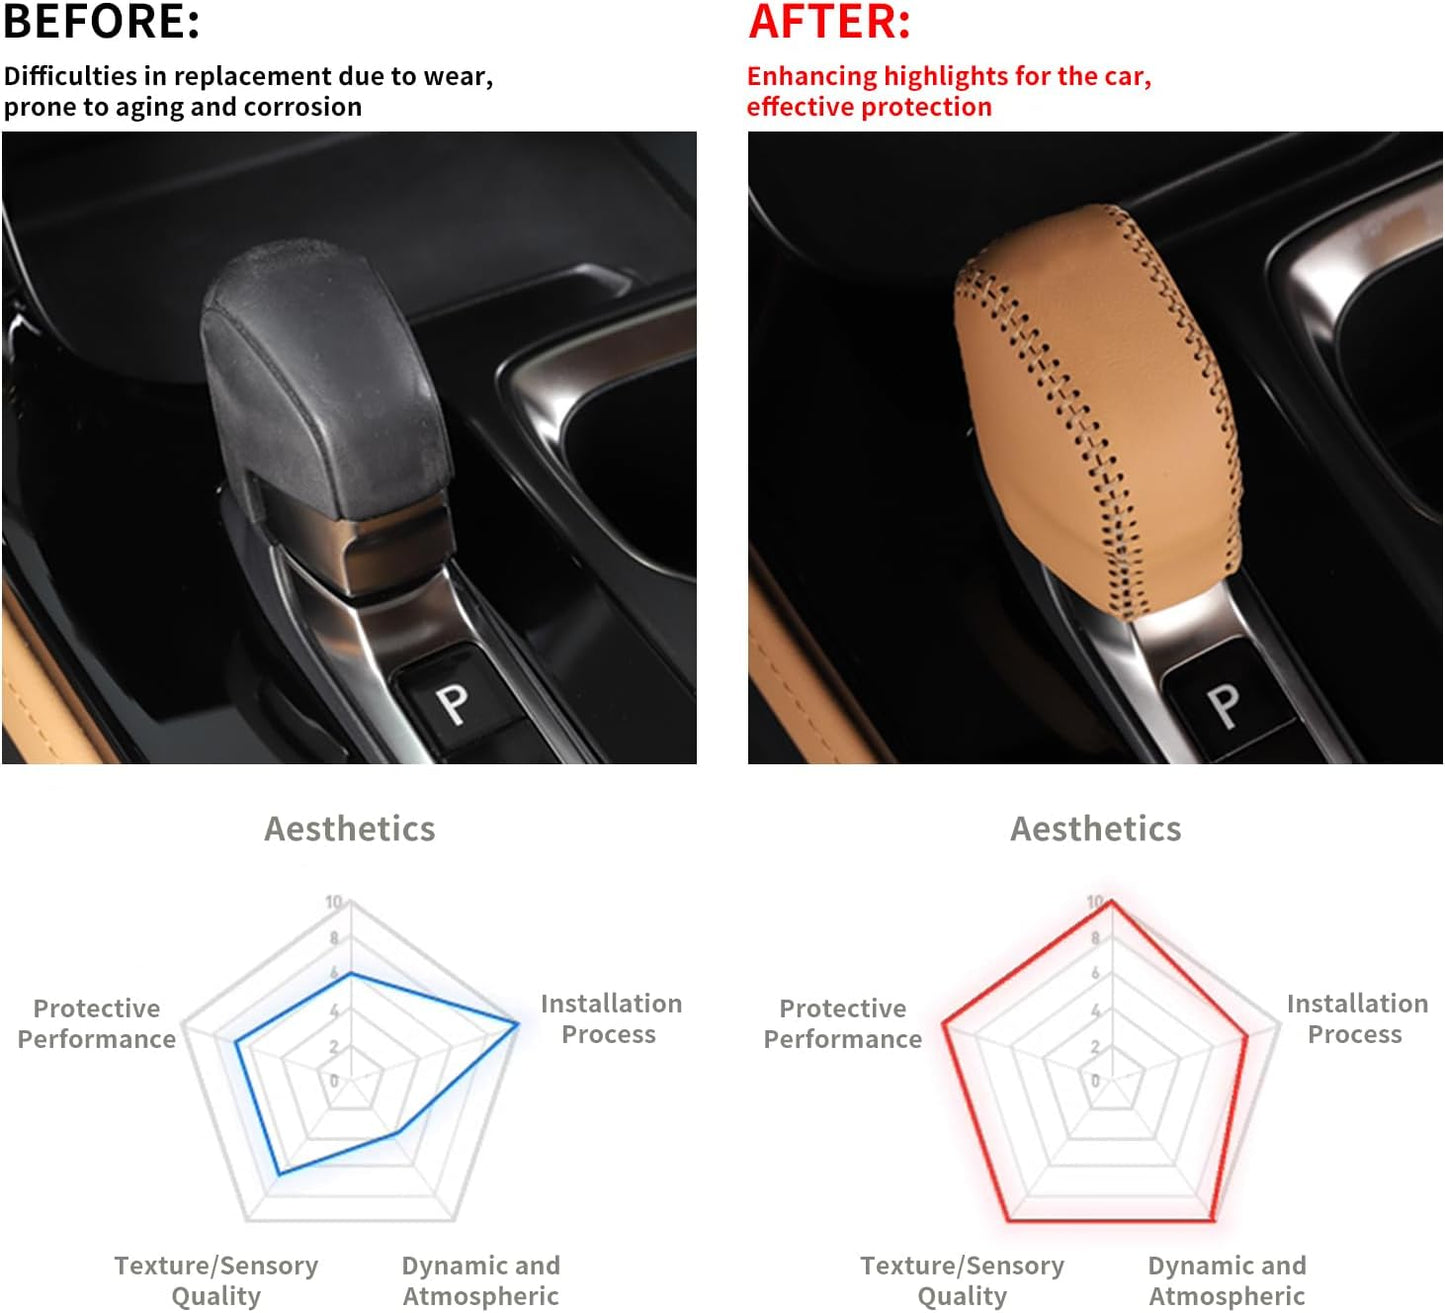 TOPABYTE Leather Automatic Gear Shift Knob Cover for Lexus NX RX